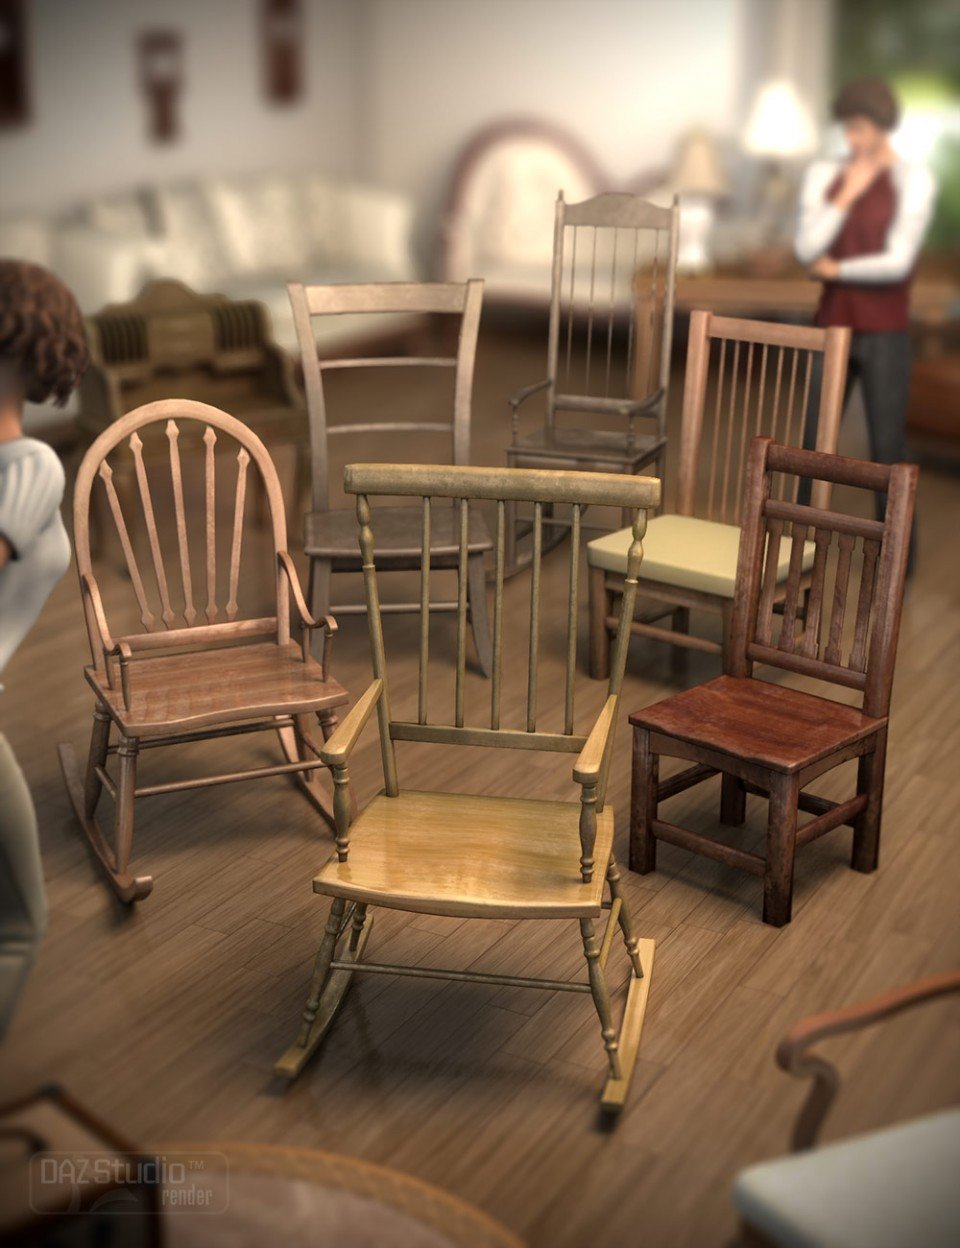 The Chair Collection_DAZ3D下载站